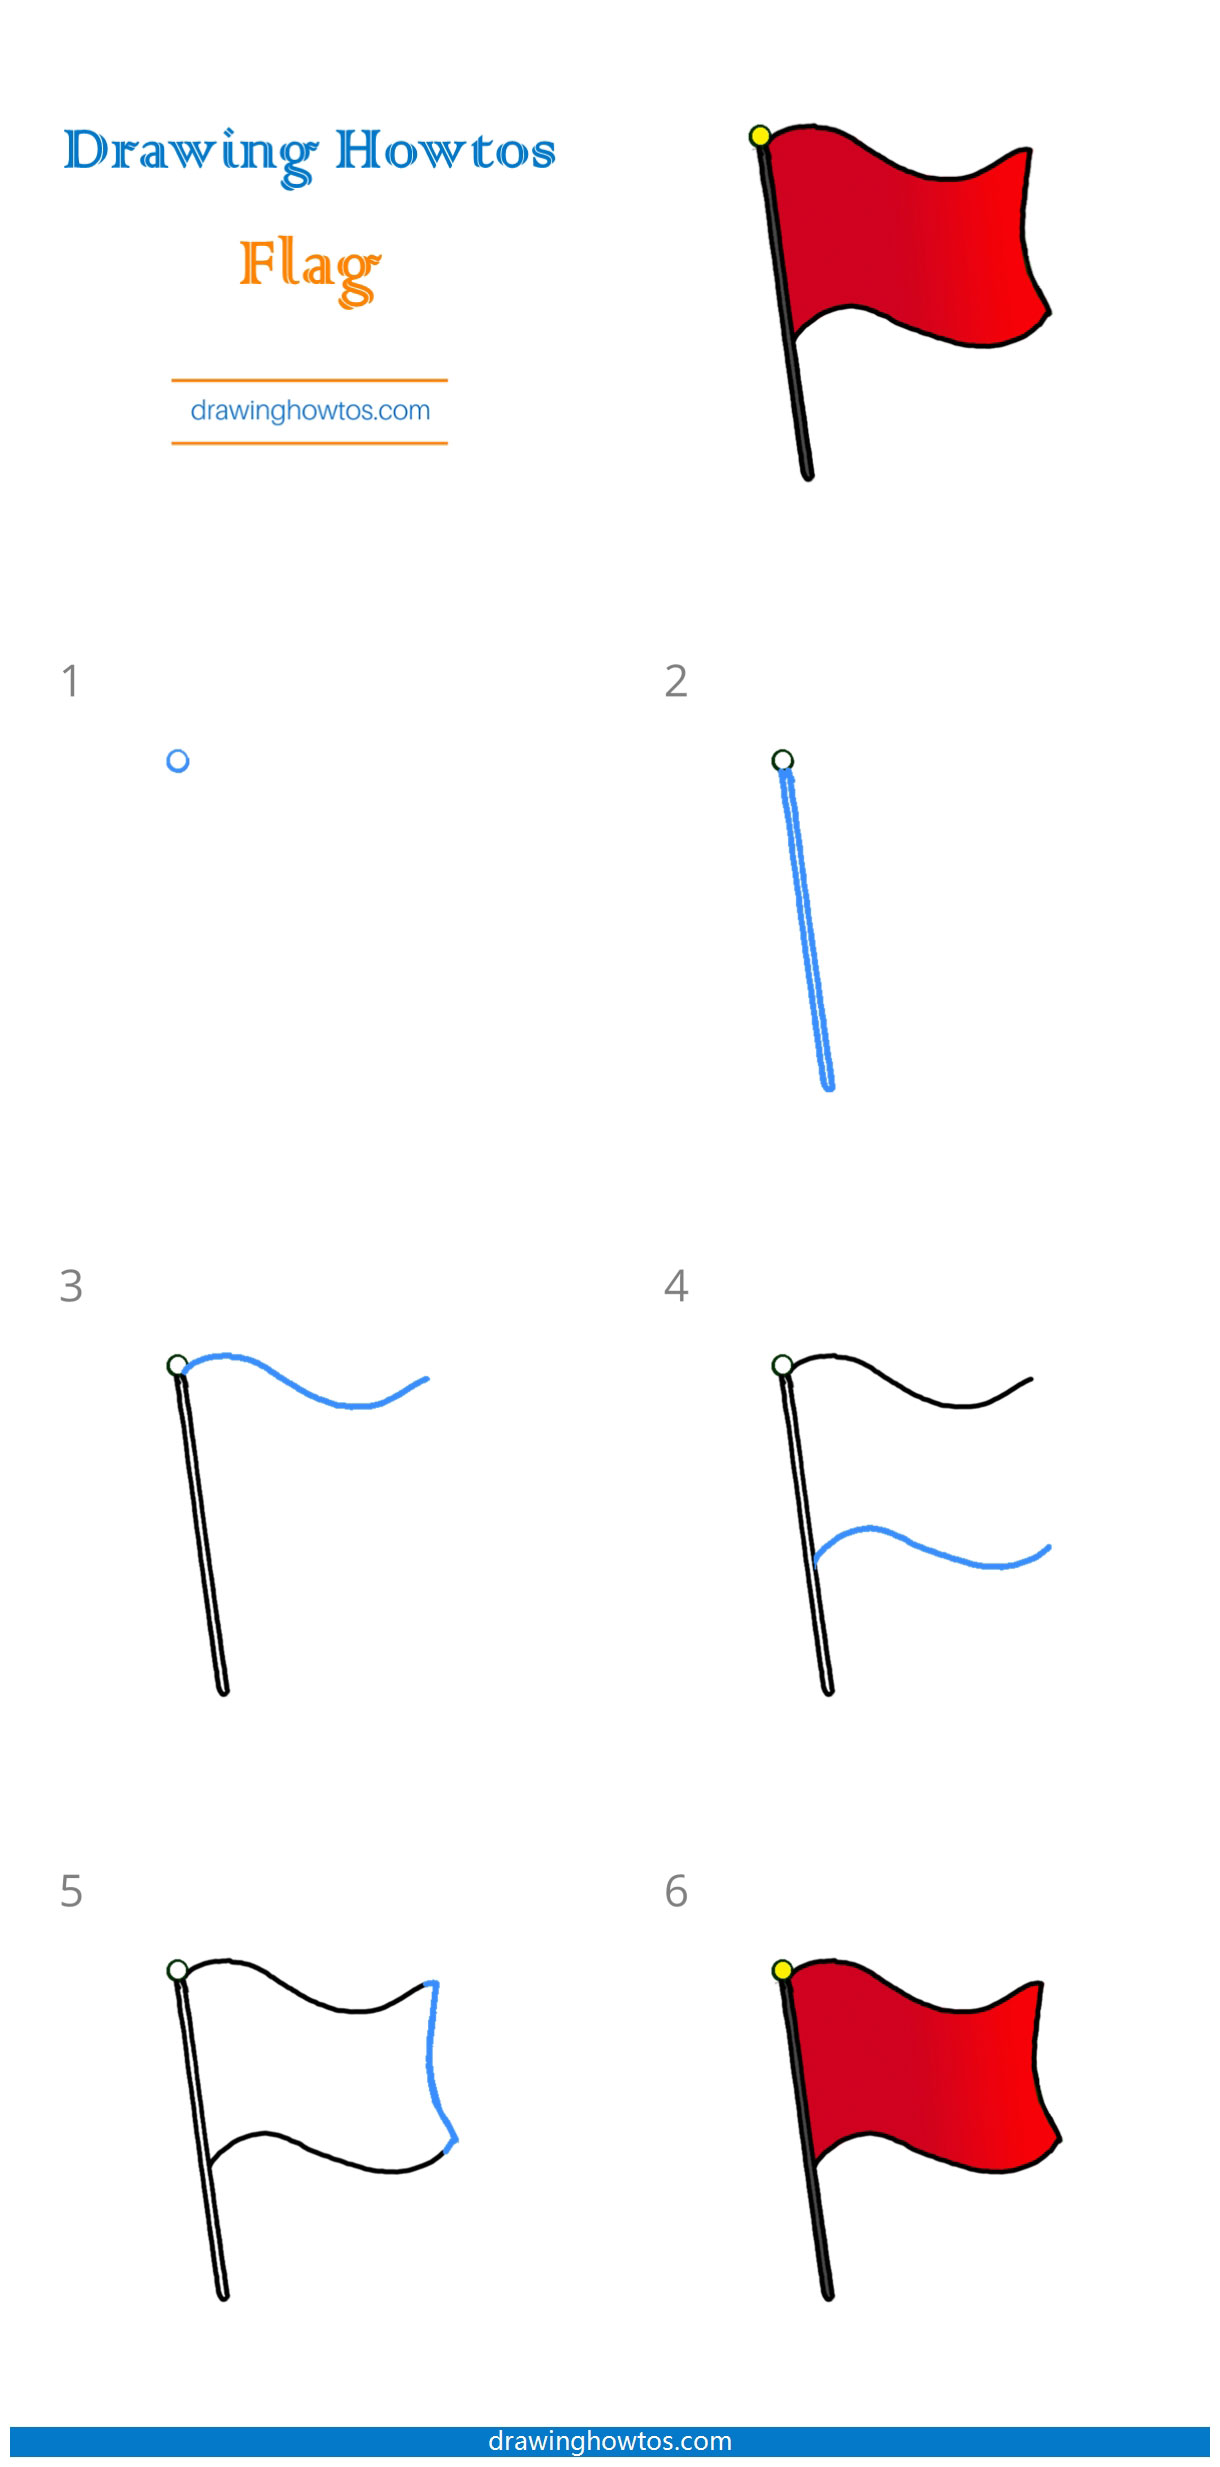 How to Draw a Flag - Step by Step Easy Drawing Guides - Drawing Howtos